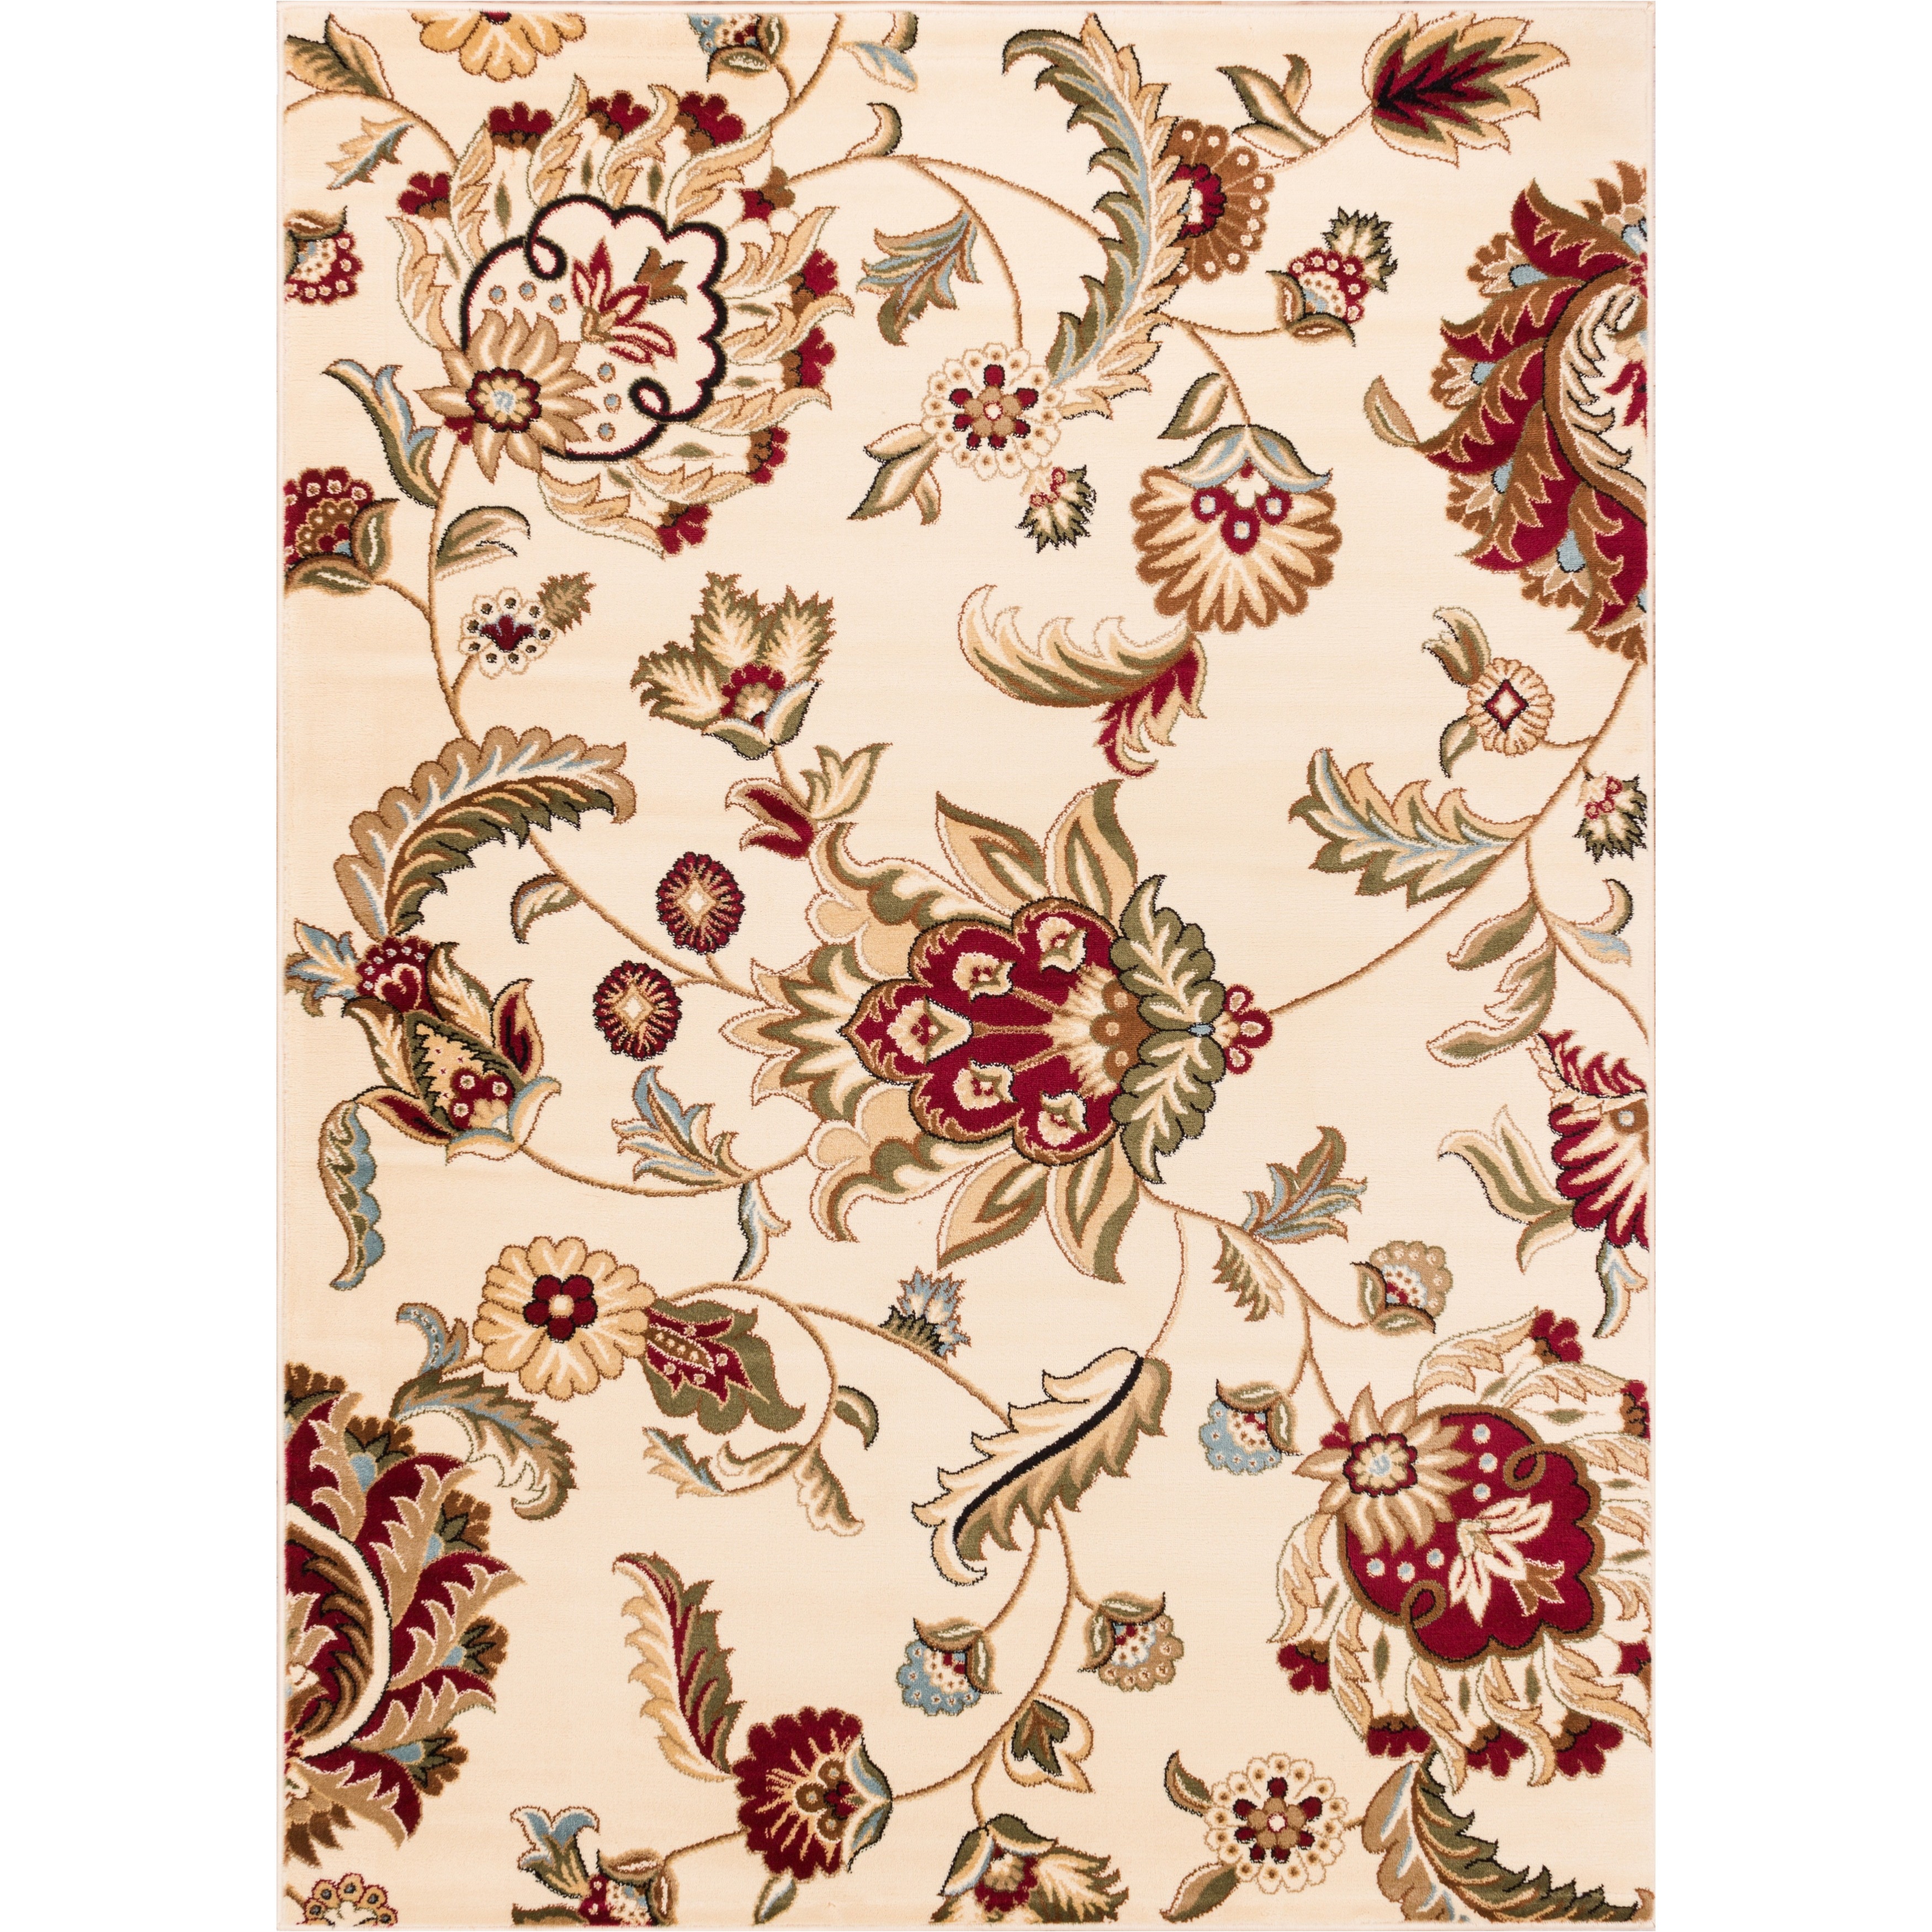 Oriental Floral Ivory Well woven Rug (93 X 126)